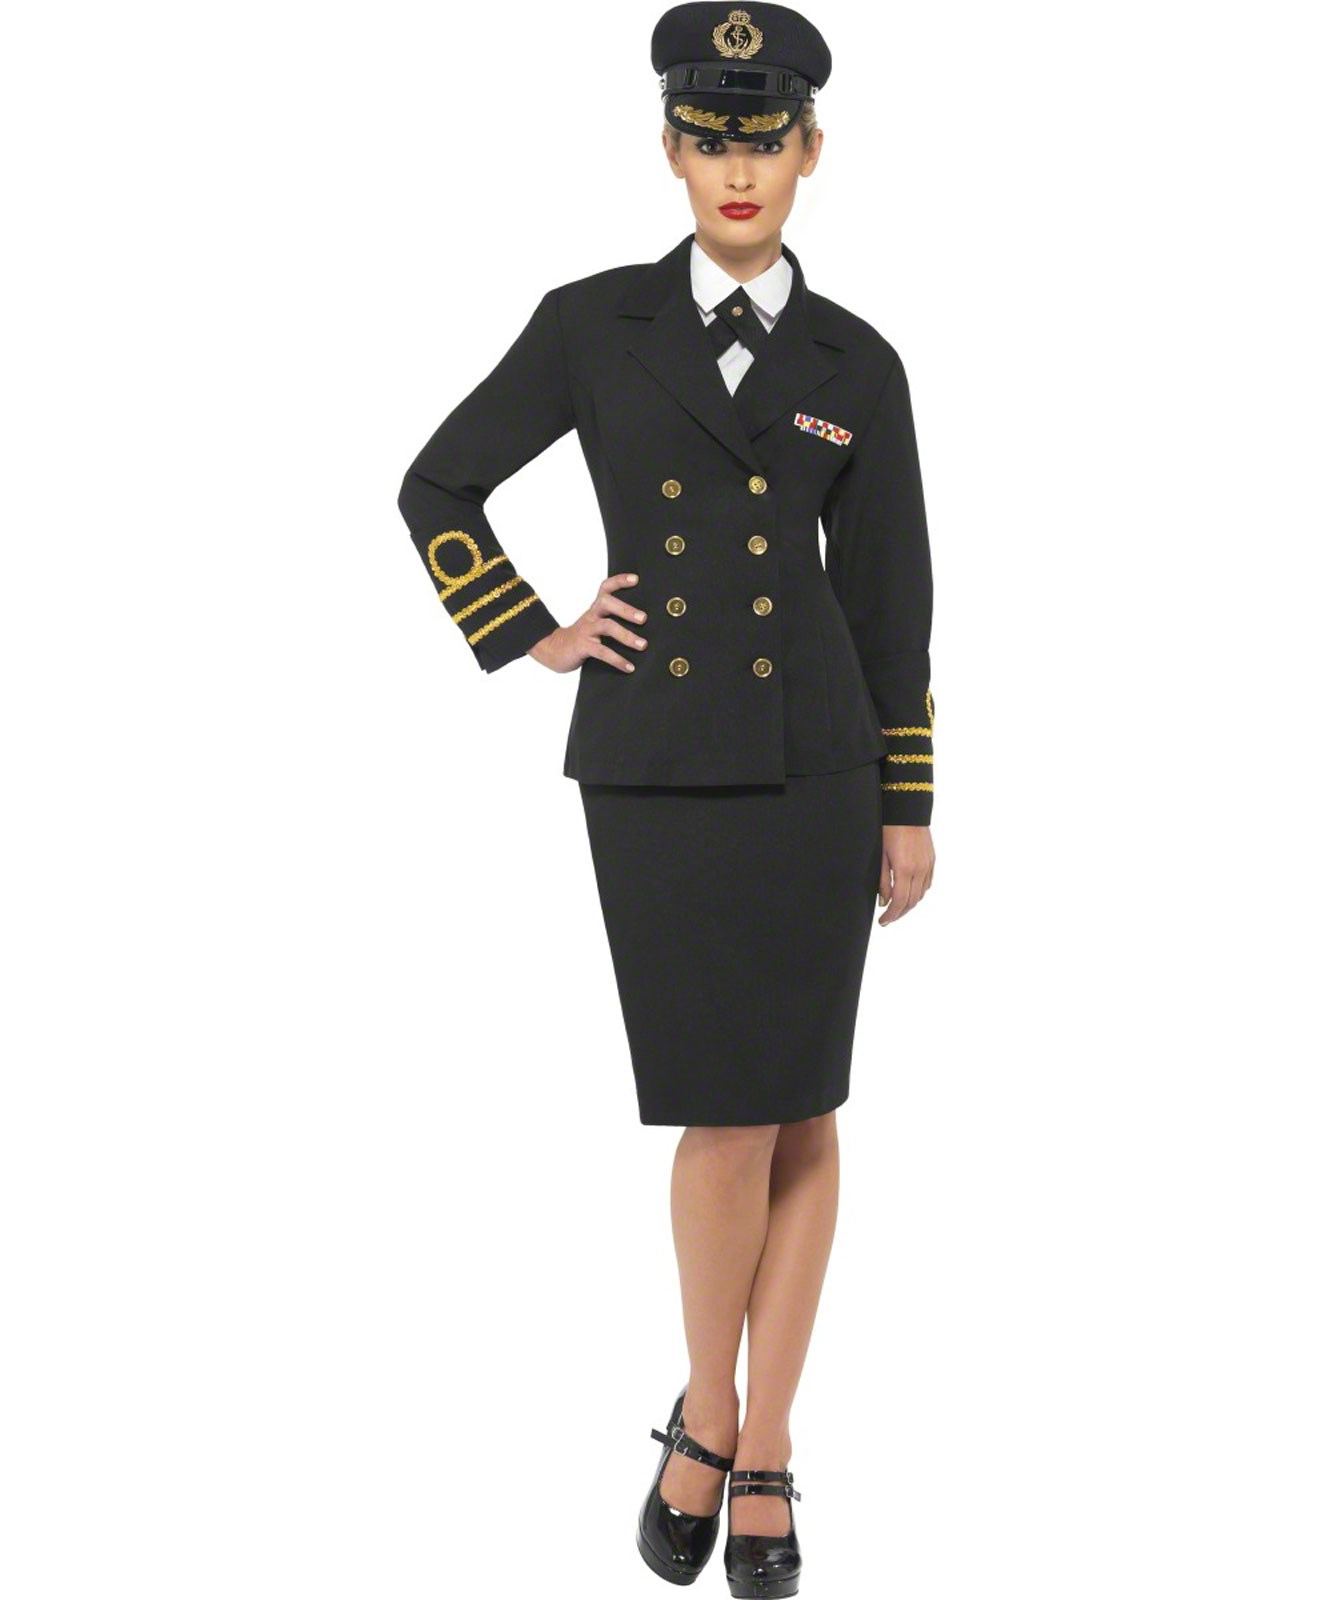 Navy Officer Plus Adult Costume